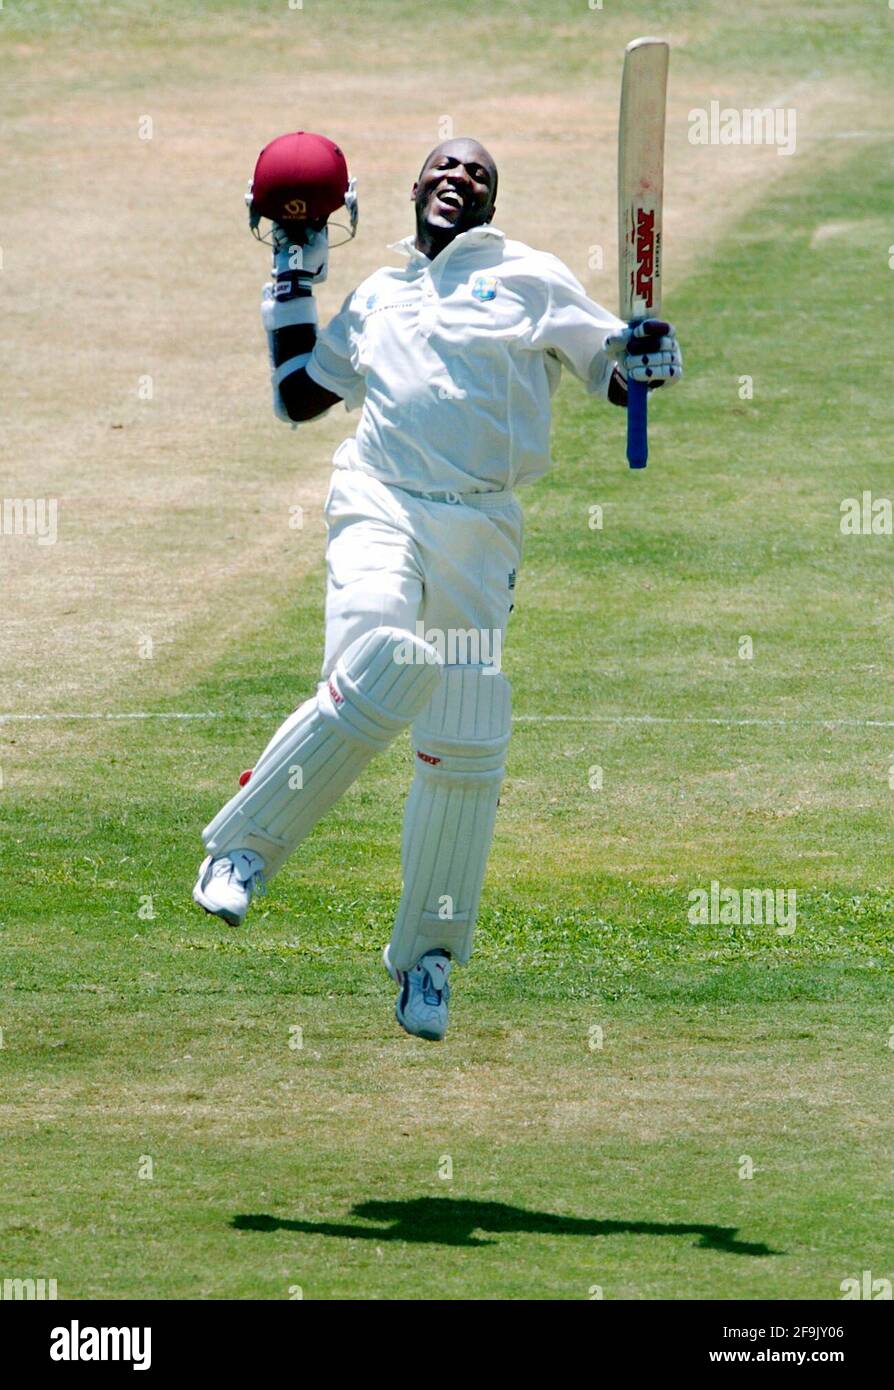 Brian Lara 4th TEST 3rd DAY ENGLAND V WEST INDIES   AT THE RECCREATION GROUND ANTIGUA 12/4/2004 BRIAN LARA AFTER BREAKING THE WORLD RECORD TEST SCORE  PICTURE DAVID ASHDOWNCRICKET IN THE WEST INDIES Stock Photo